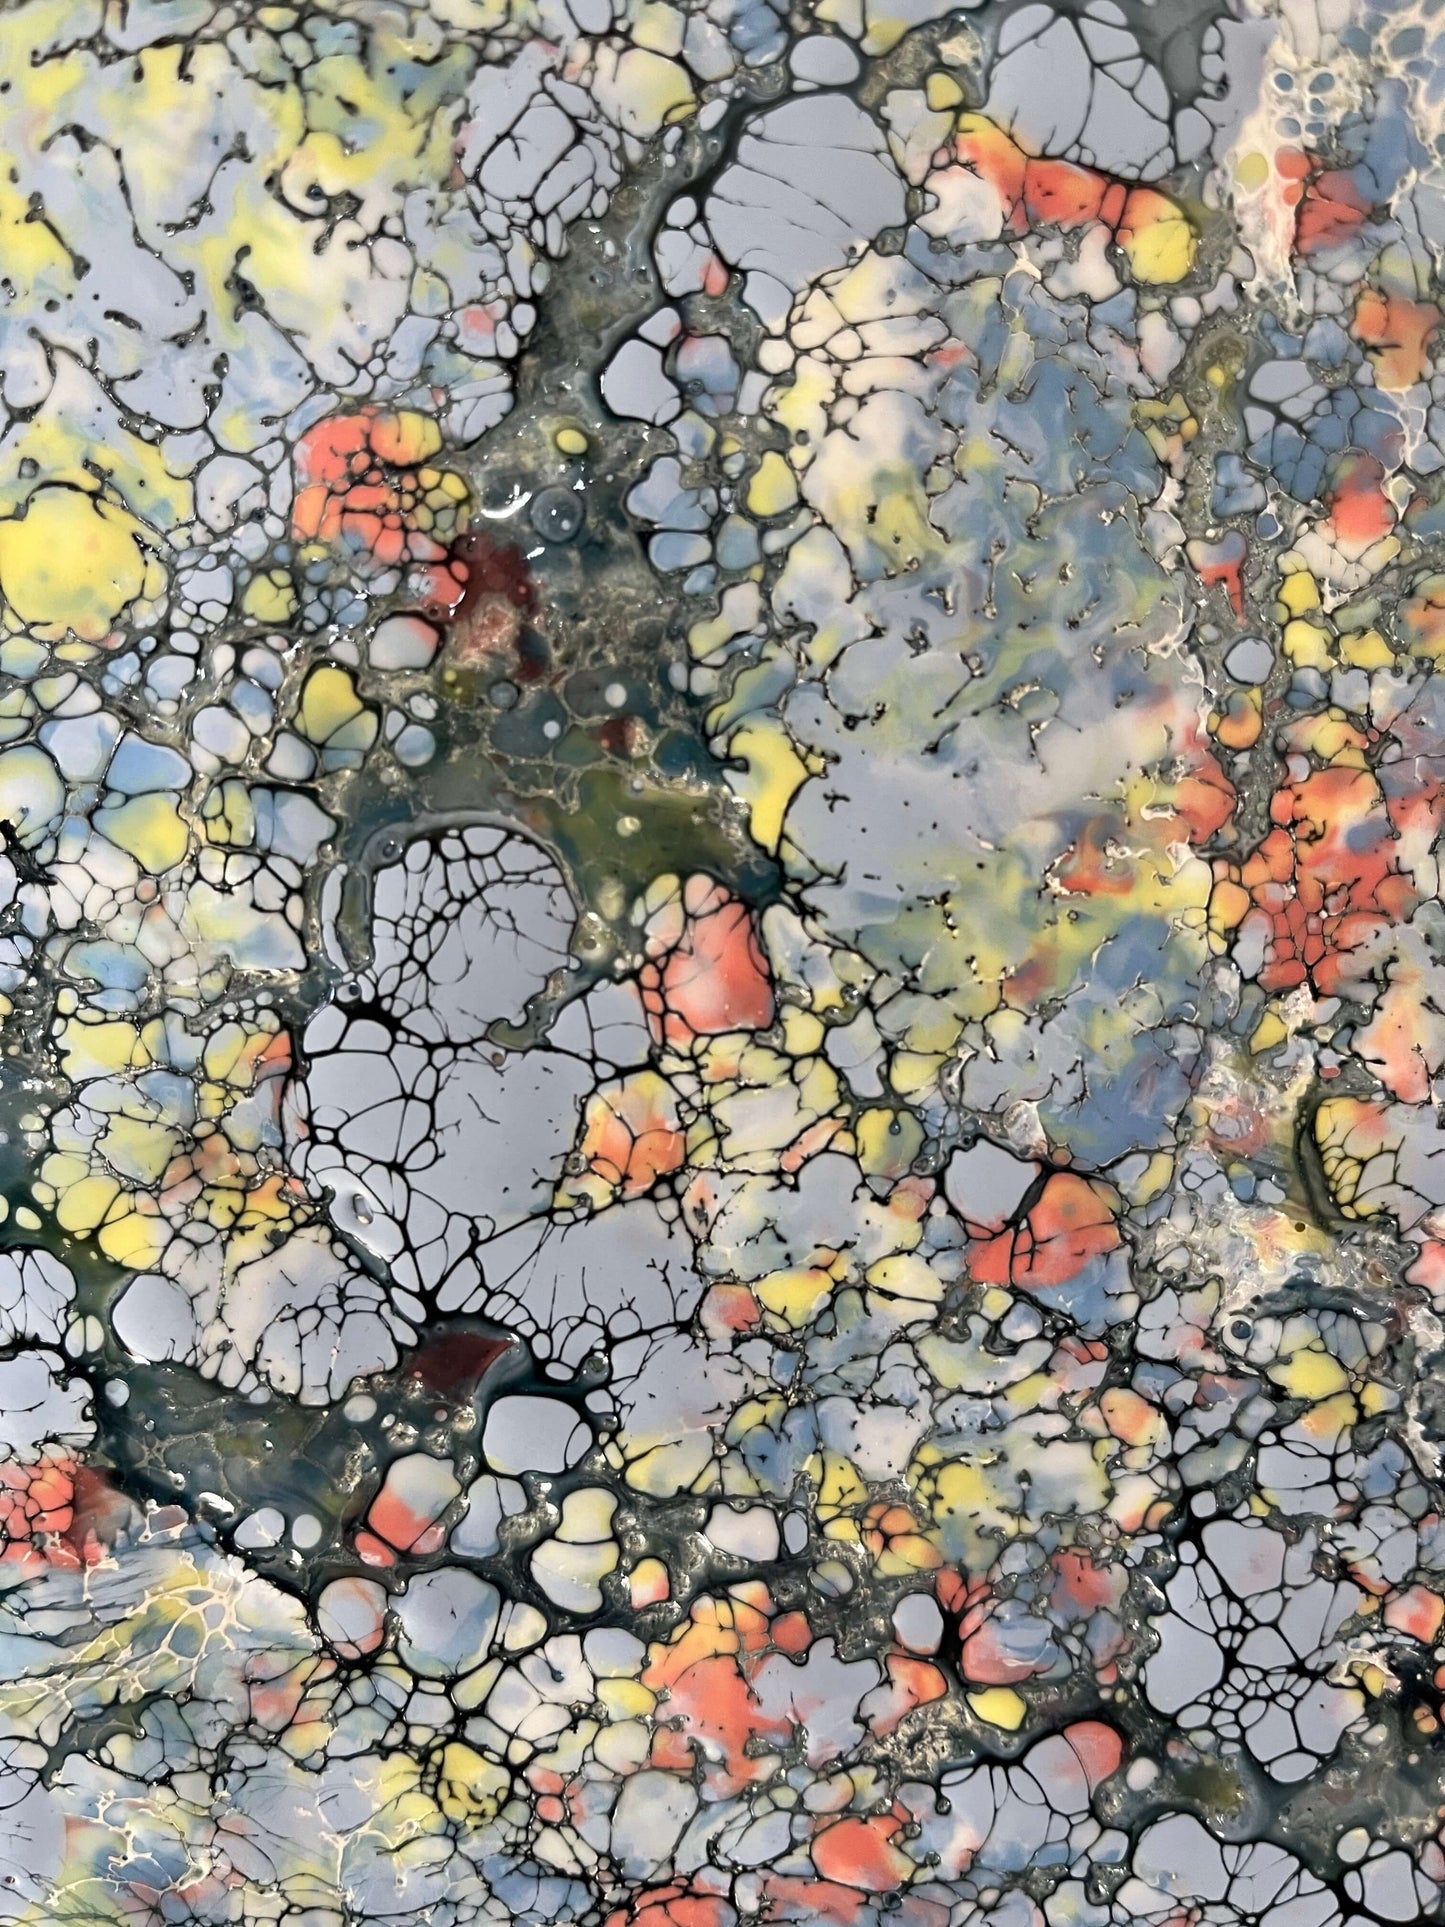 Close up.This piece has a very uplifting energy with its variations of blues, greys and specks of yellow and orange. it is a textured painting, when you run your fingers over it, you will feel ripples of wax. The droplets of orange wax signifies Monarch butterflies taking to the sky.